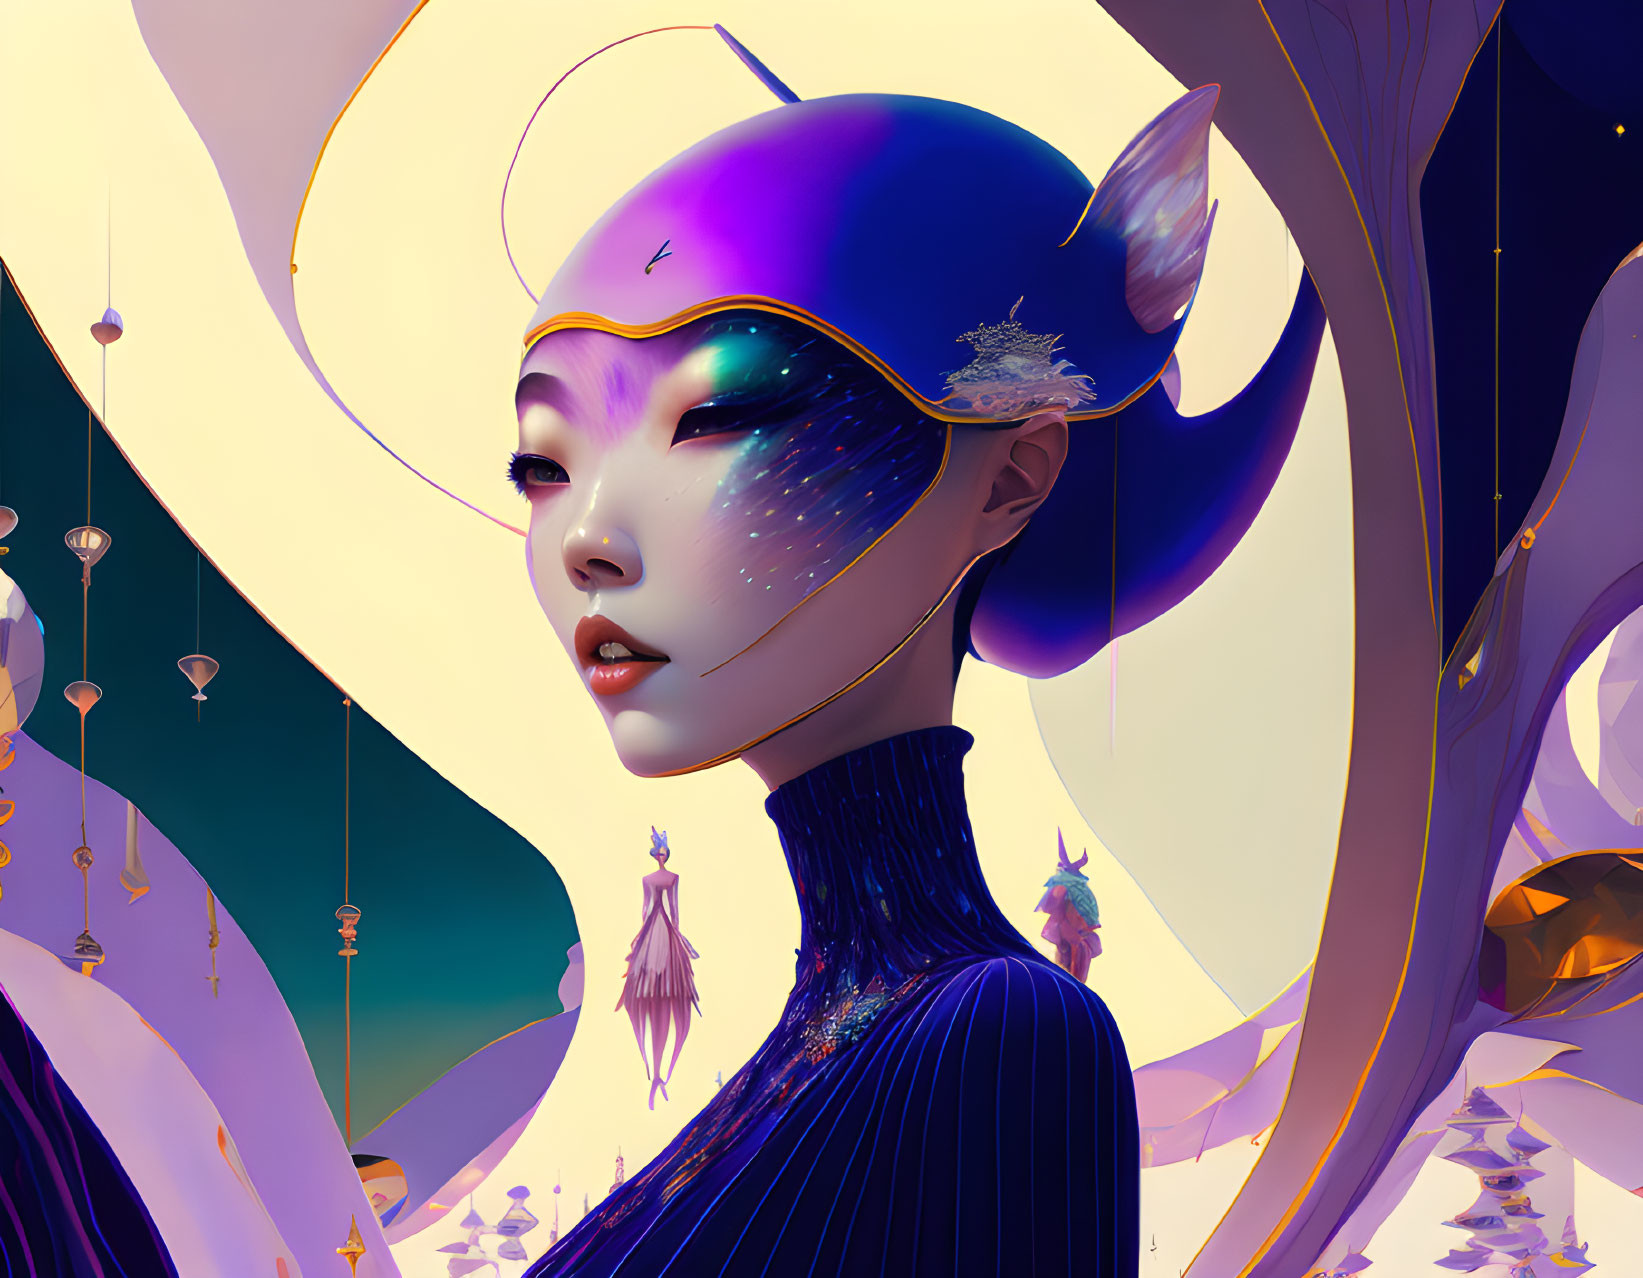 Stylized illustration of a woman with shiny blue cap and ethereal adornments